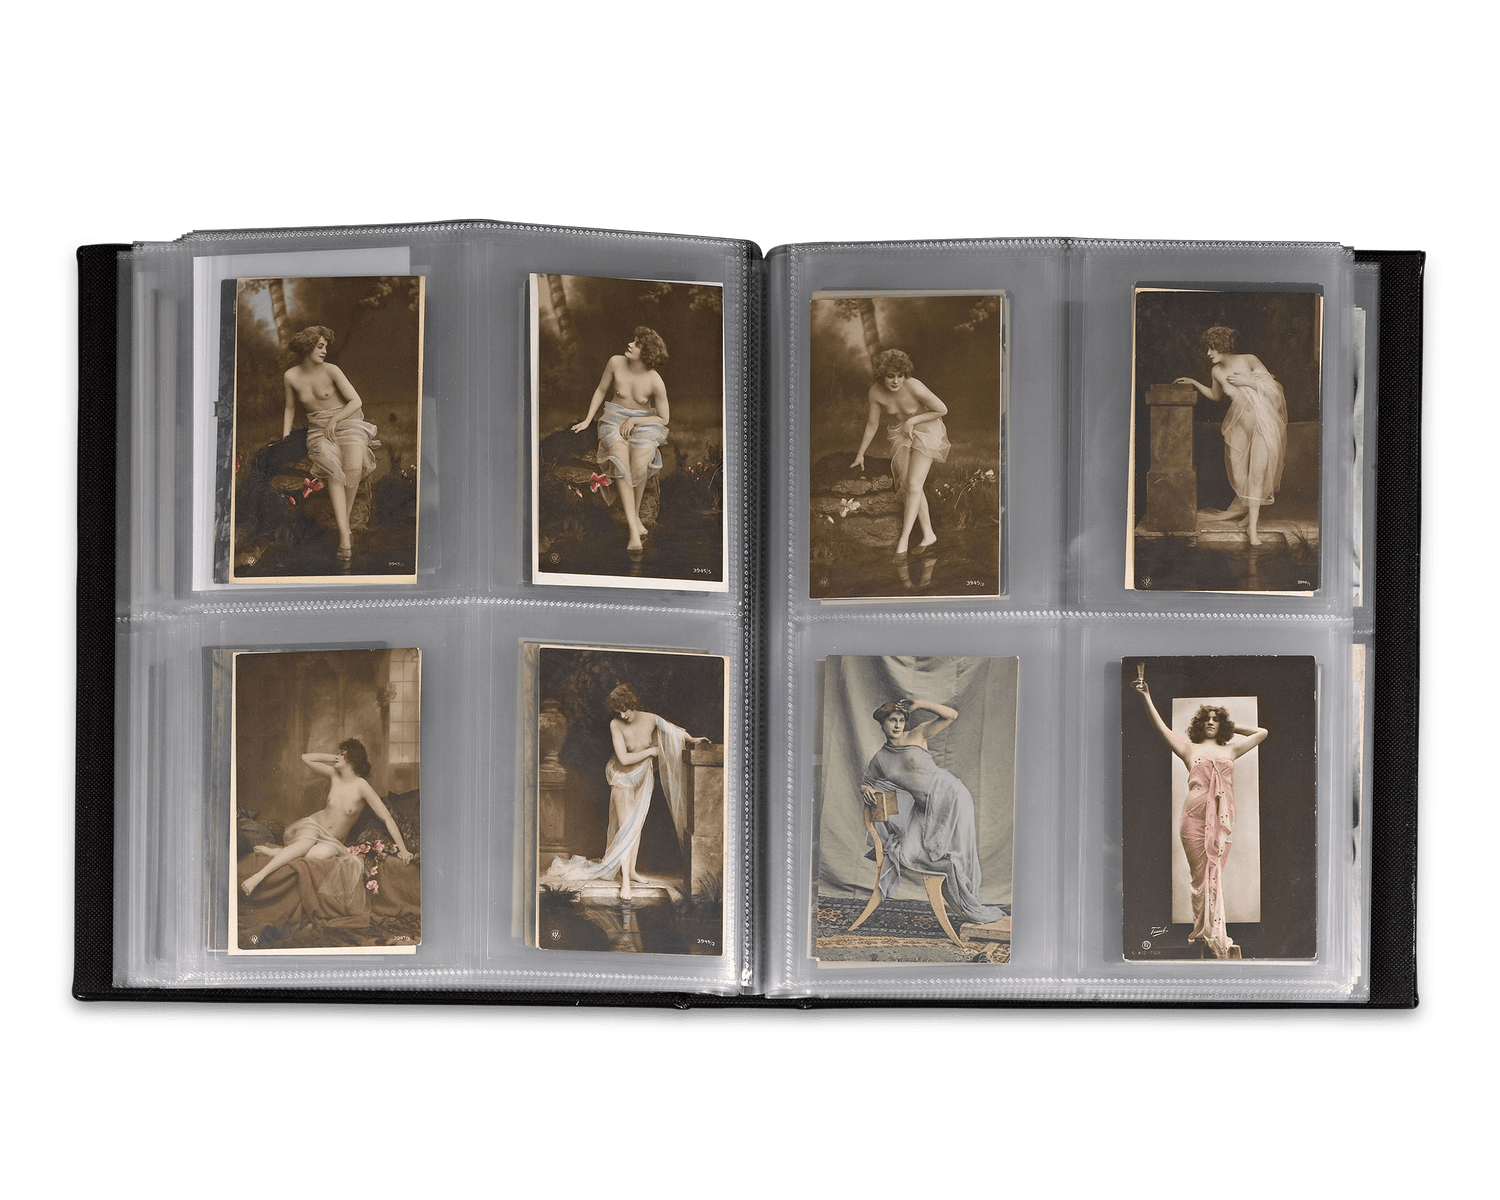 This collection contains 363 erotic French postcards featuring beauties of the Belle Epoque